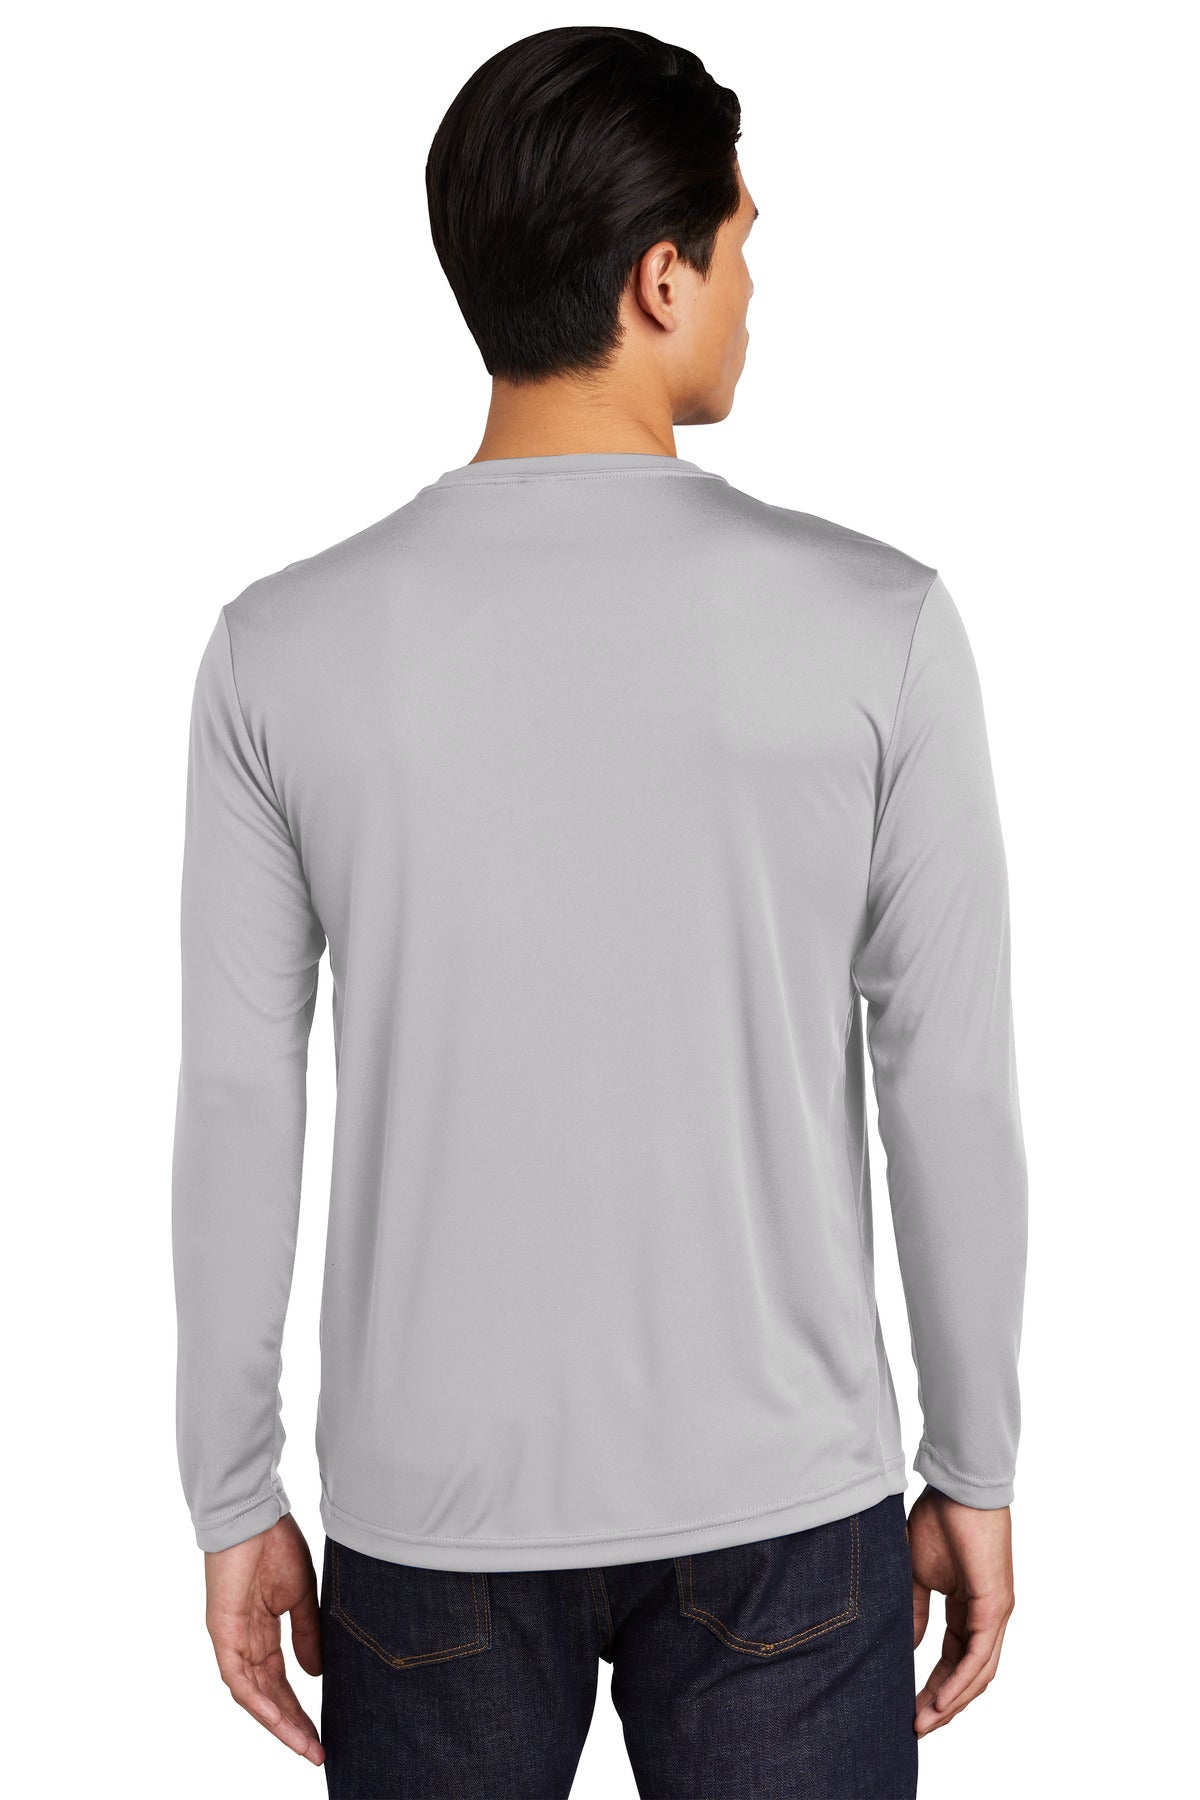 Sport-Tek® Long Sleeve PosiCharge® Competitor™ Tee. ST350LS [Silver] - DFW Impression